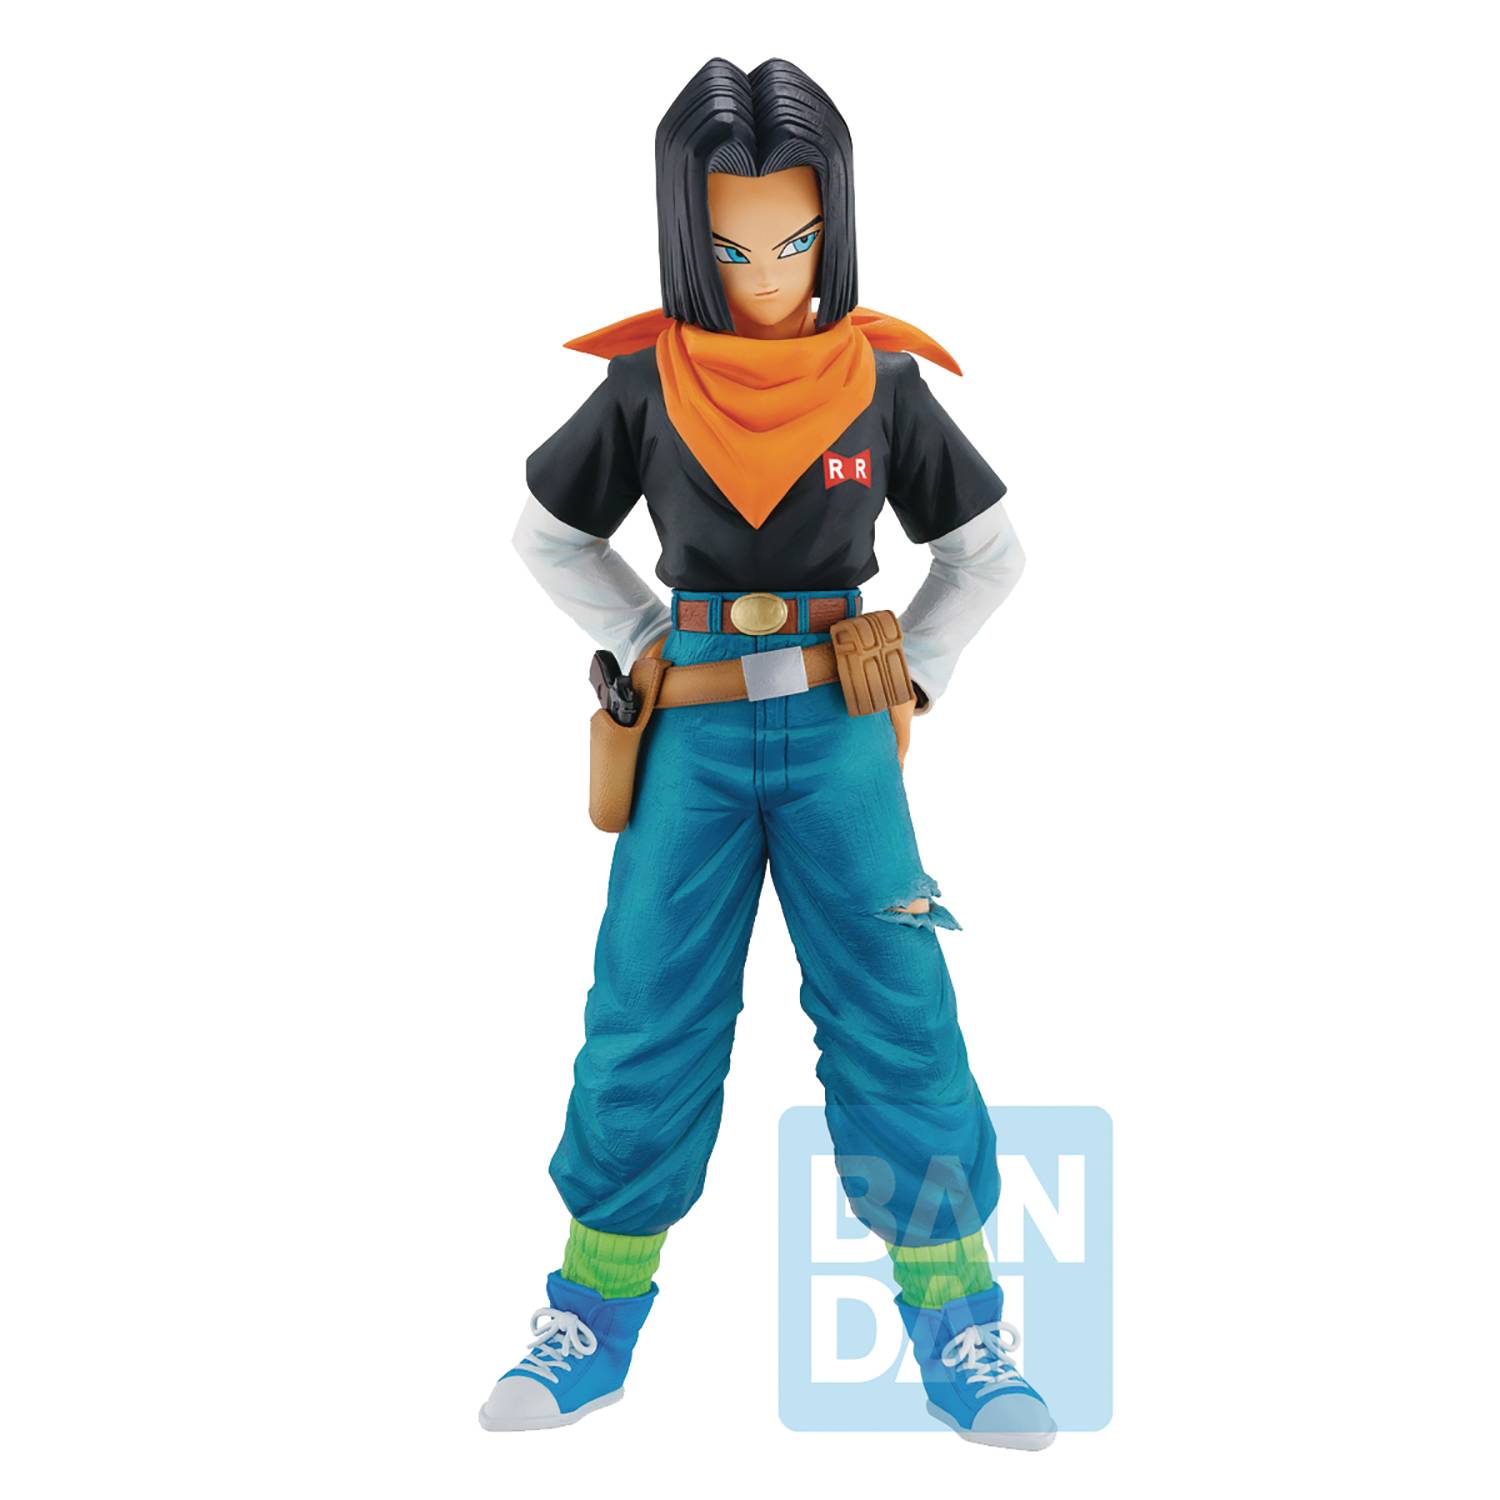 DRAGON BALL Z ANDROID FEAR ANDROID NO 17 PX ICHIBAN FIG (NET